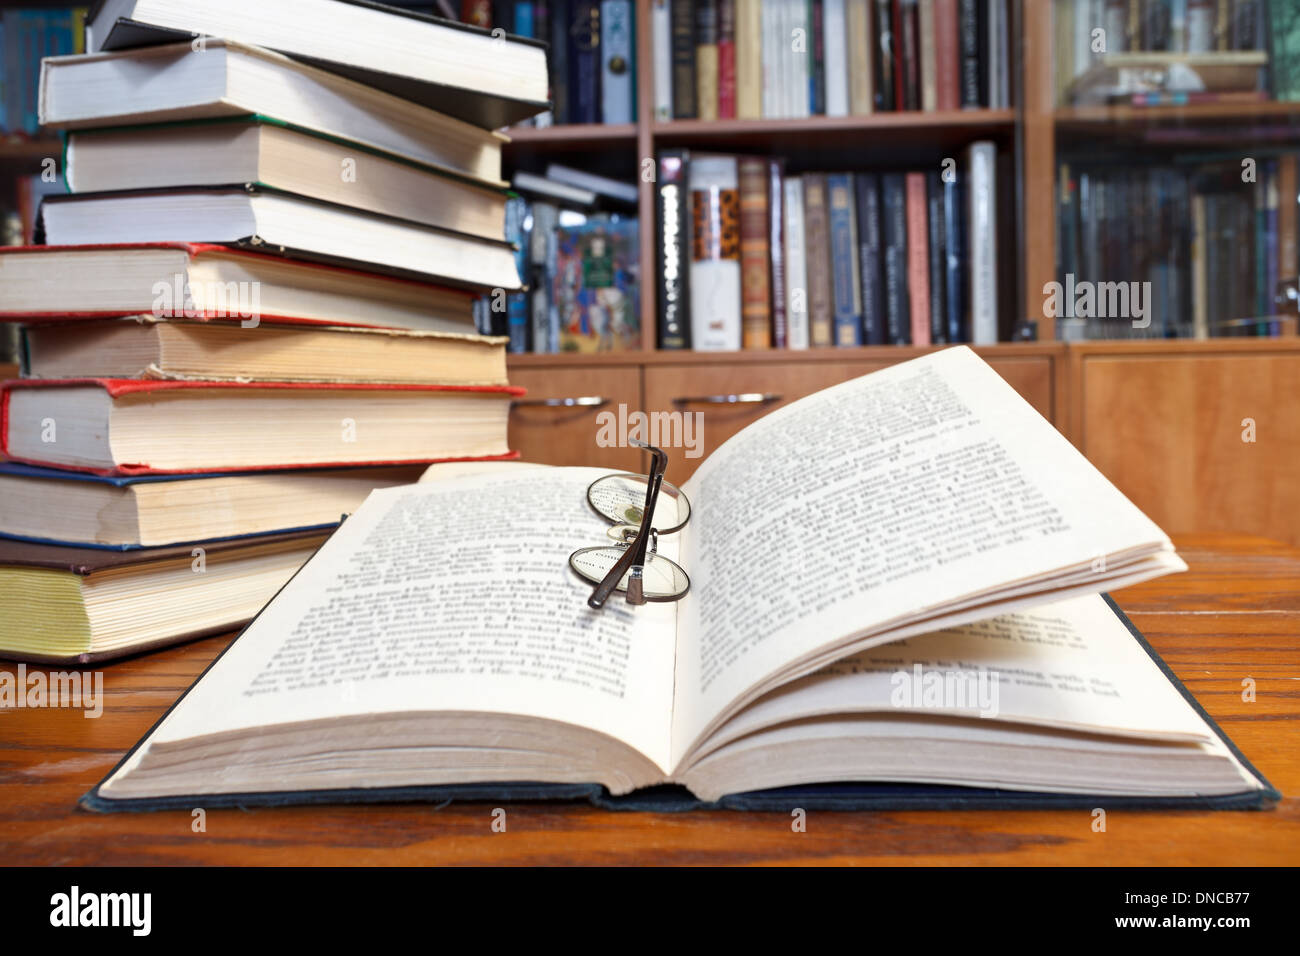 stack of books and open book and round glasses close up on wooden table near bookcases Stock Photo